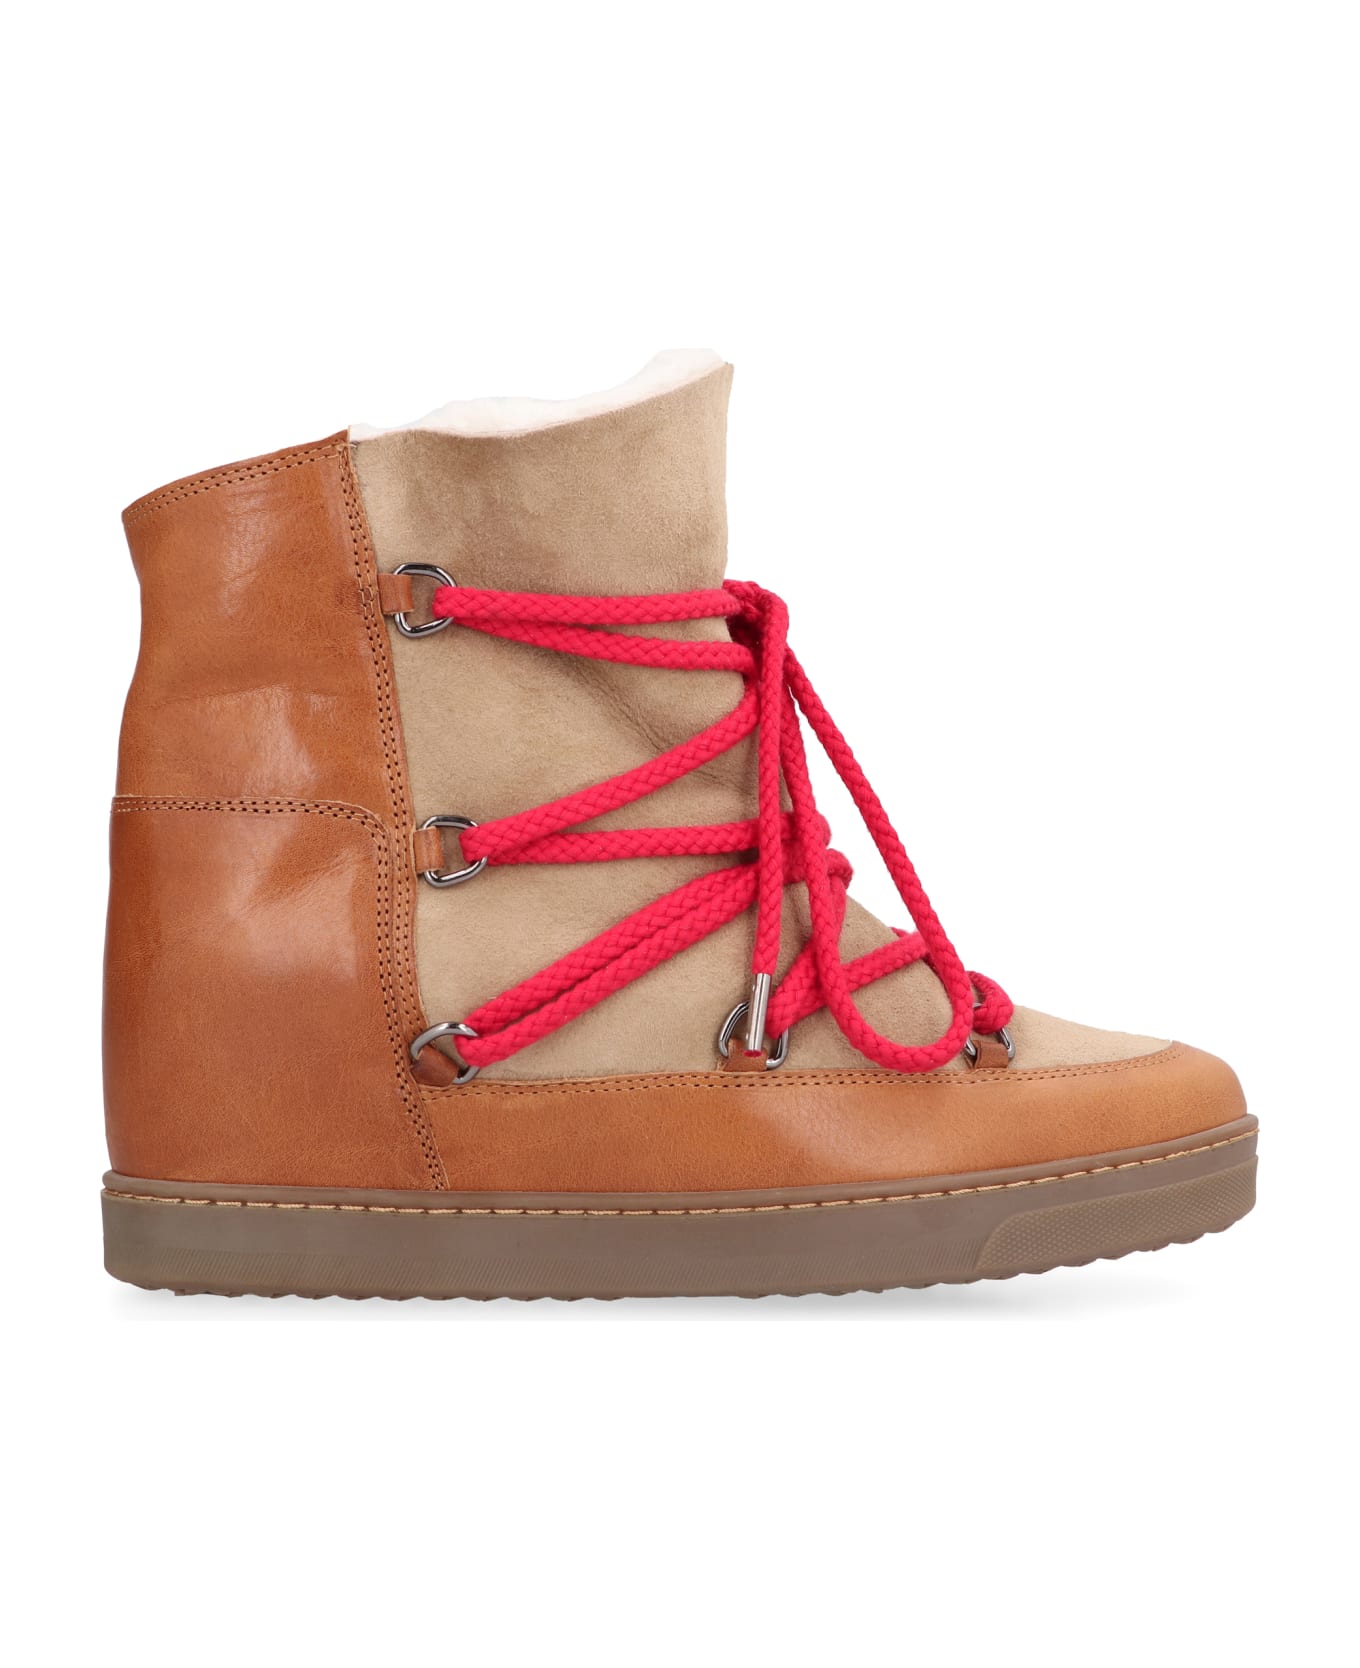 Isabel Marant Nowles Hiking Boots - Camel